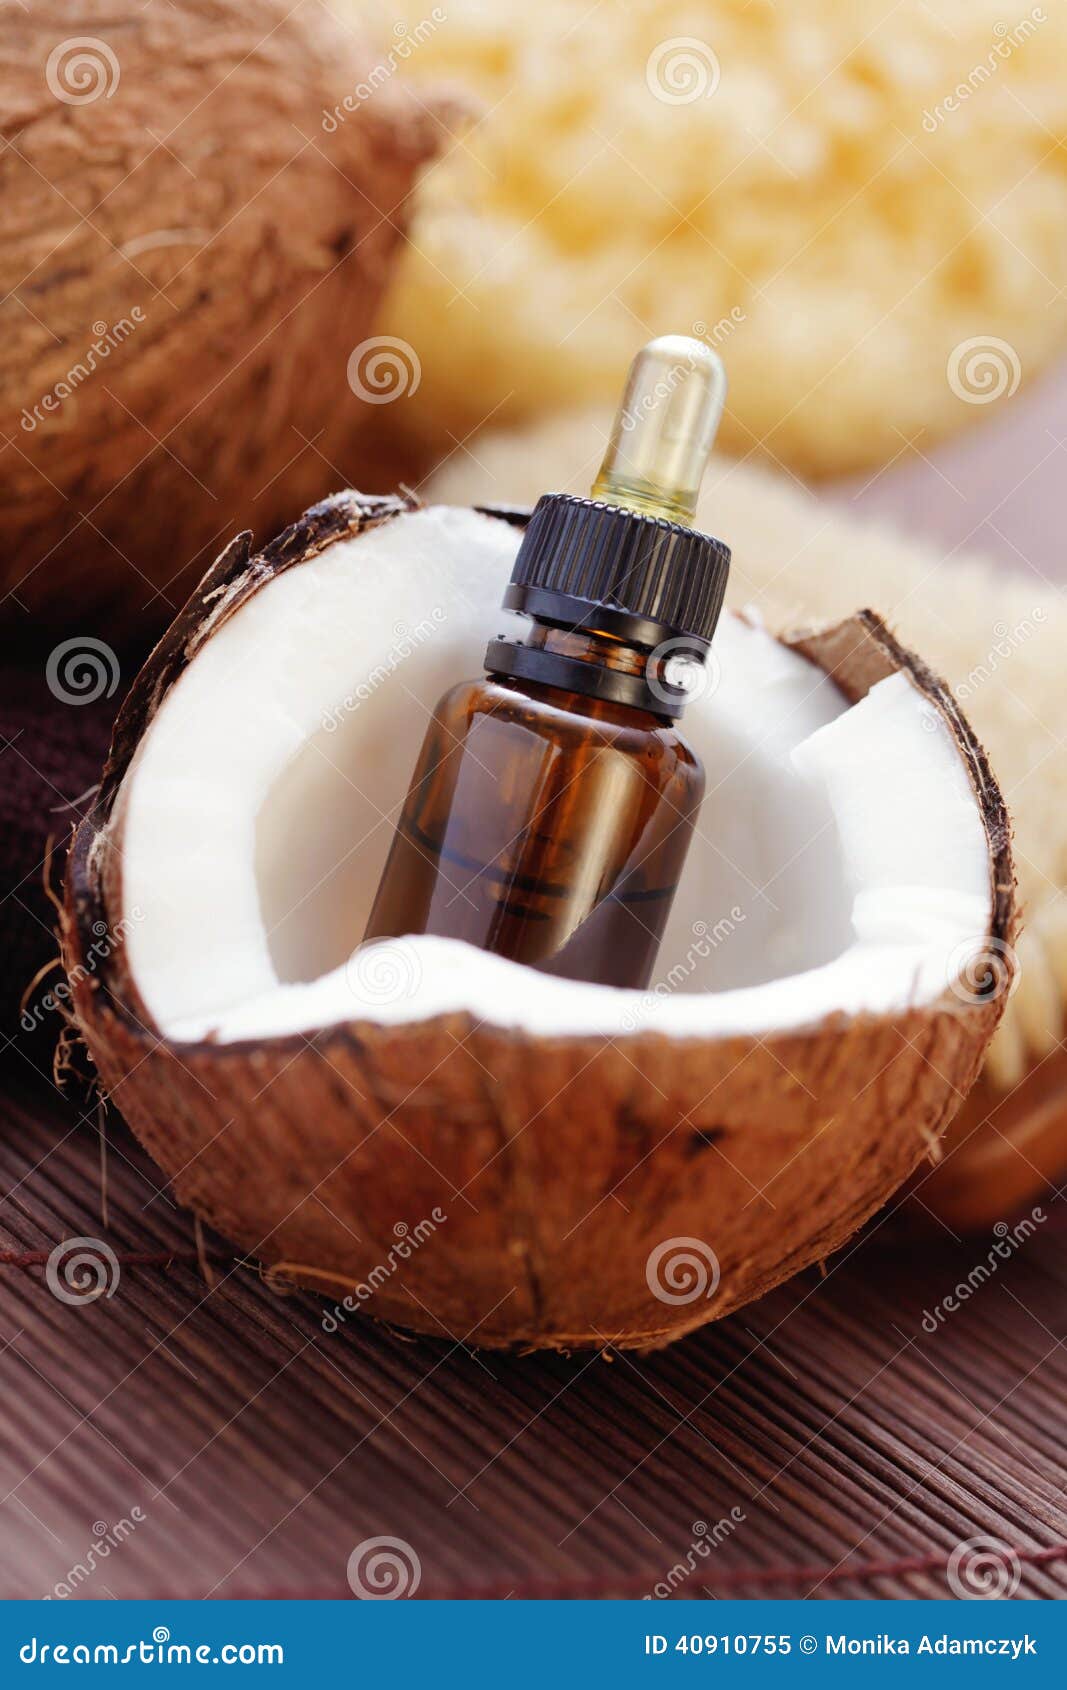 Coconut essential oil stock image. Image of healthy, perfume